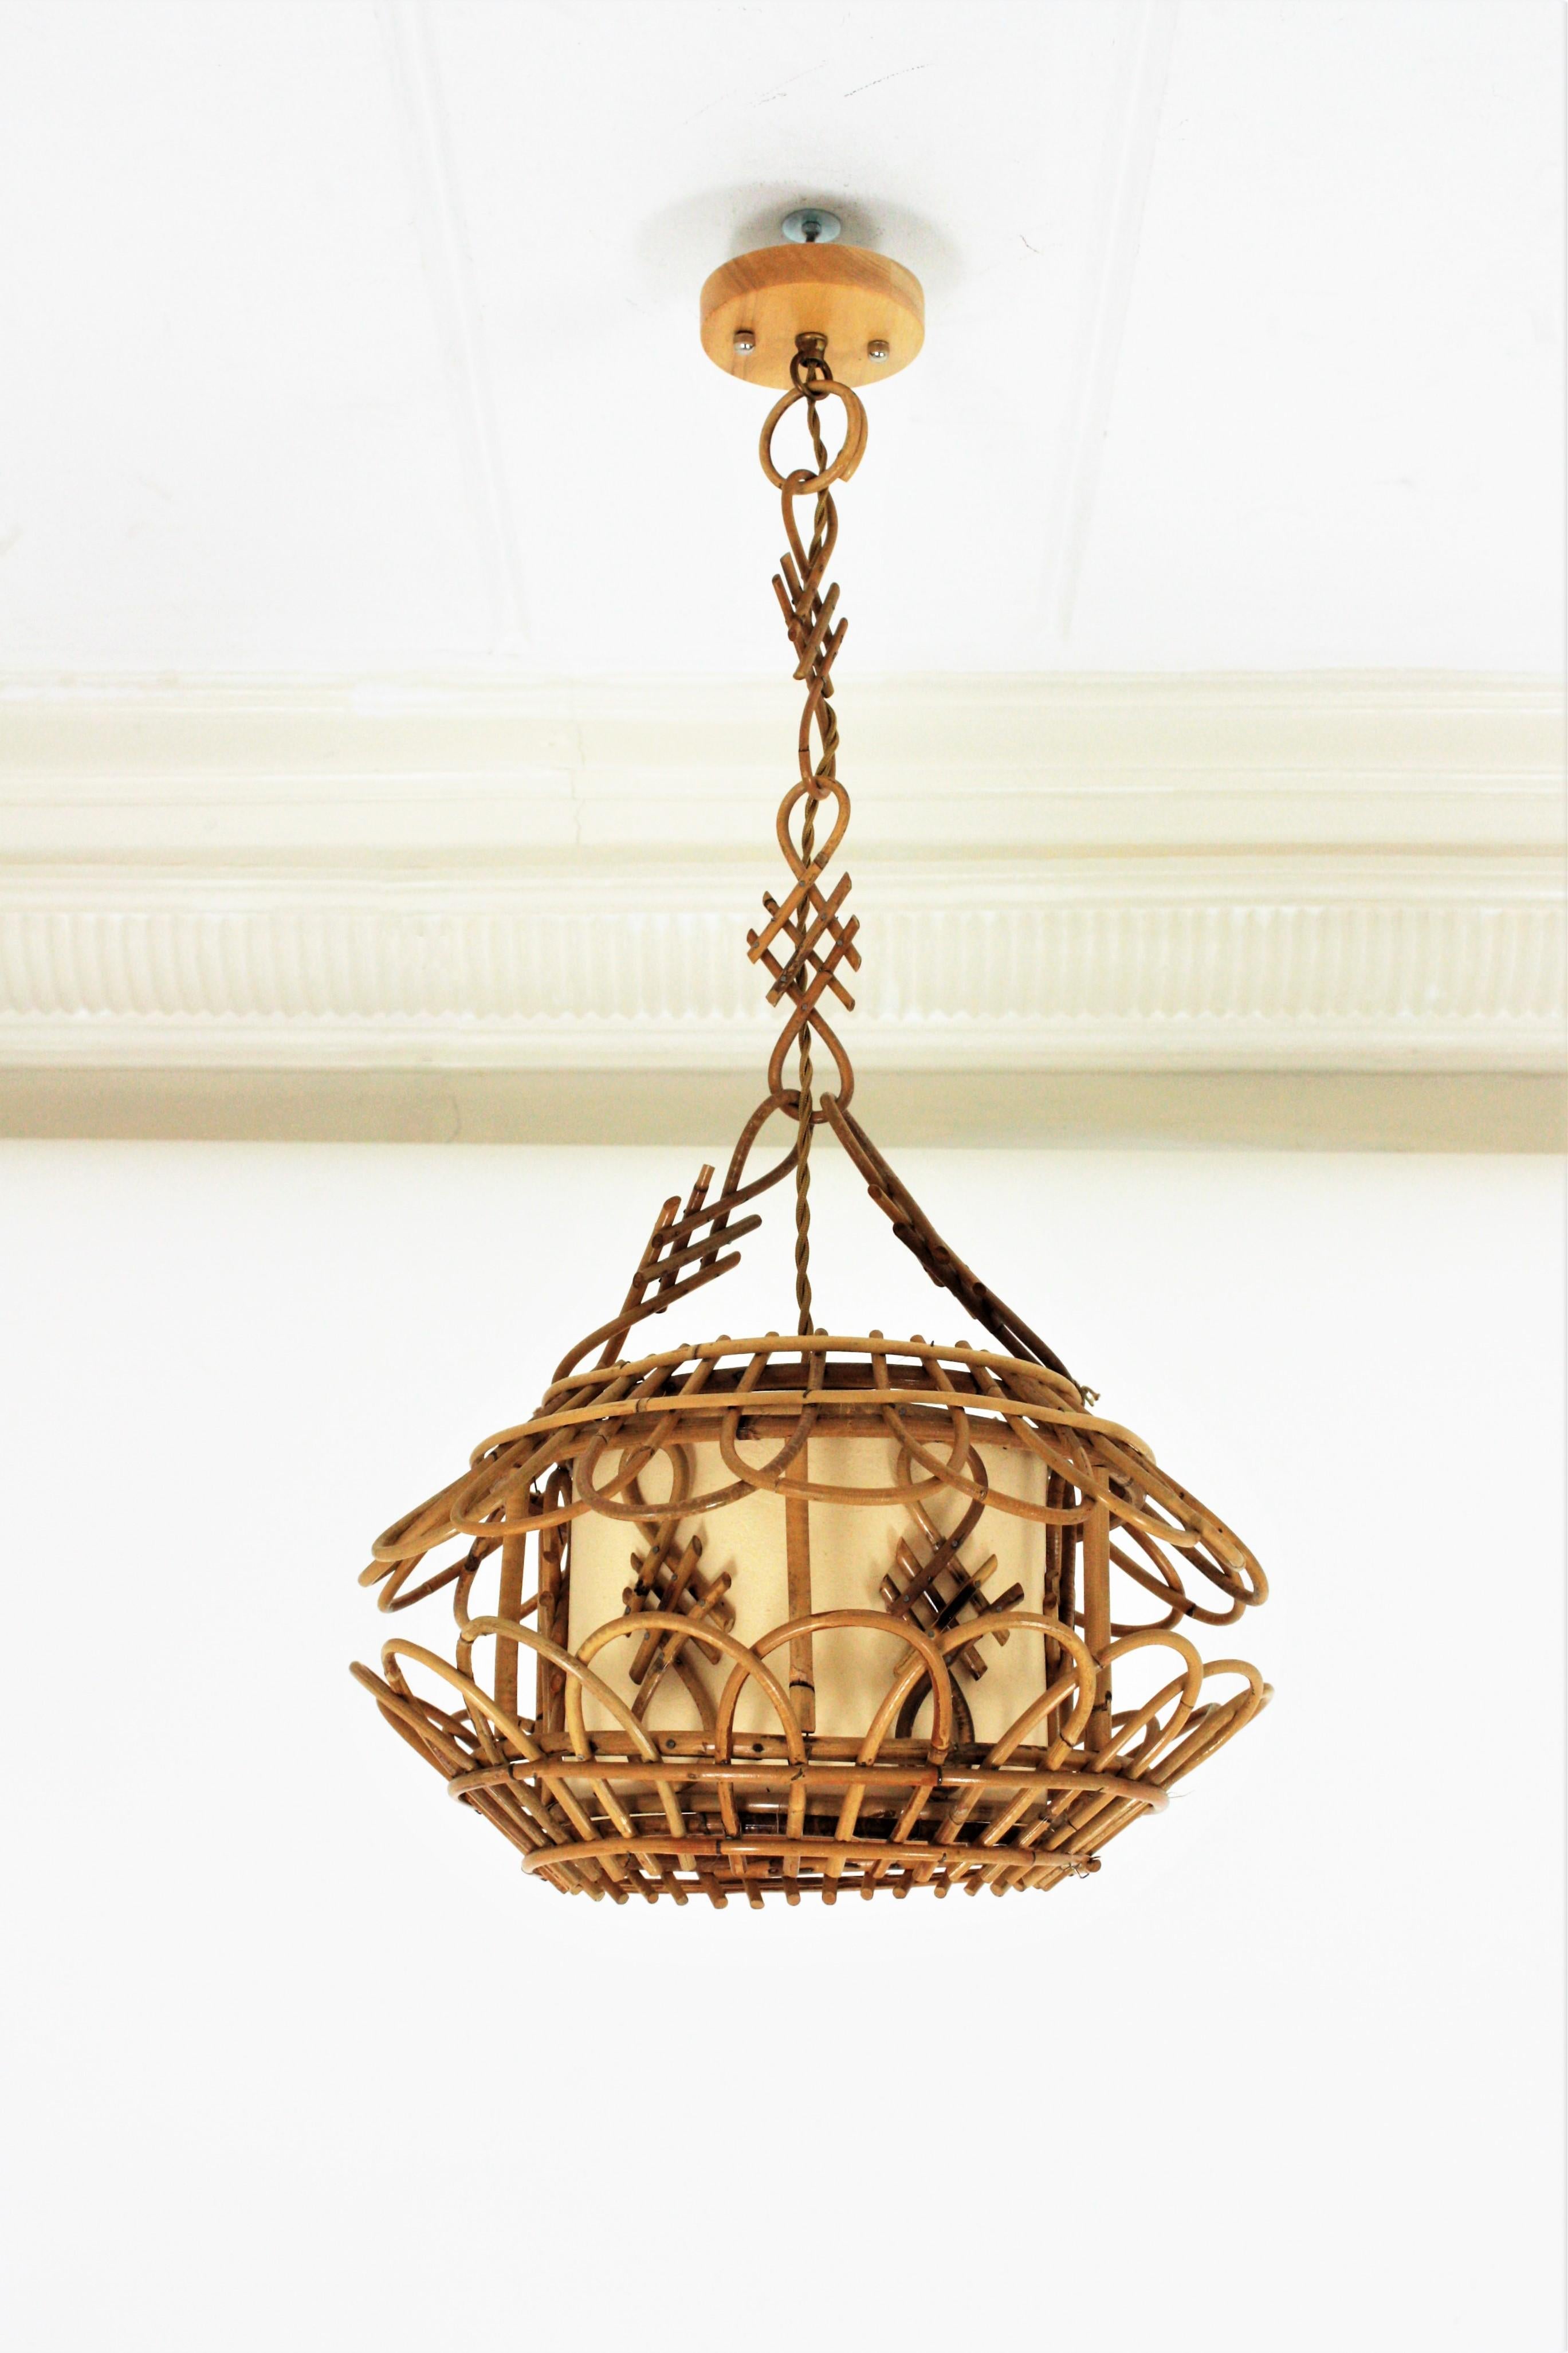 Midcentury Pendant Light or Lantern, Rattan, 1950s
Eye-catching chinoiserie style handcrafted bamboo and Rattan Pagoda shaped pendant lamp / lantern. France, 1950s.
This rattan chandelier features a pagoda shape rattan hanging lamp with oriental